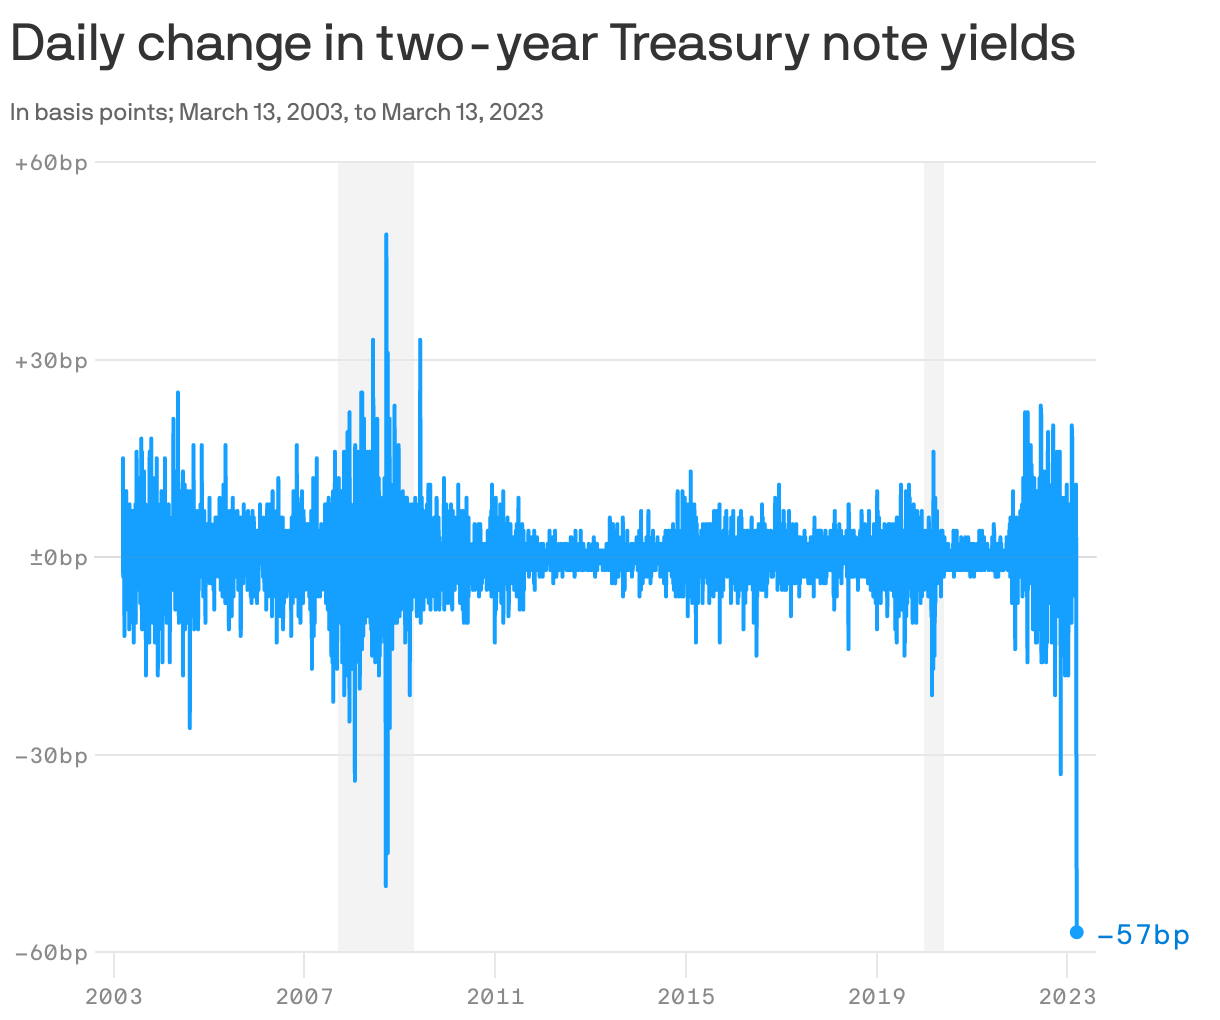 Daily change in two-year Treasury note yields